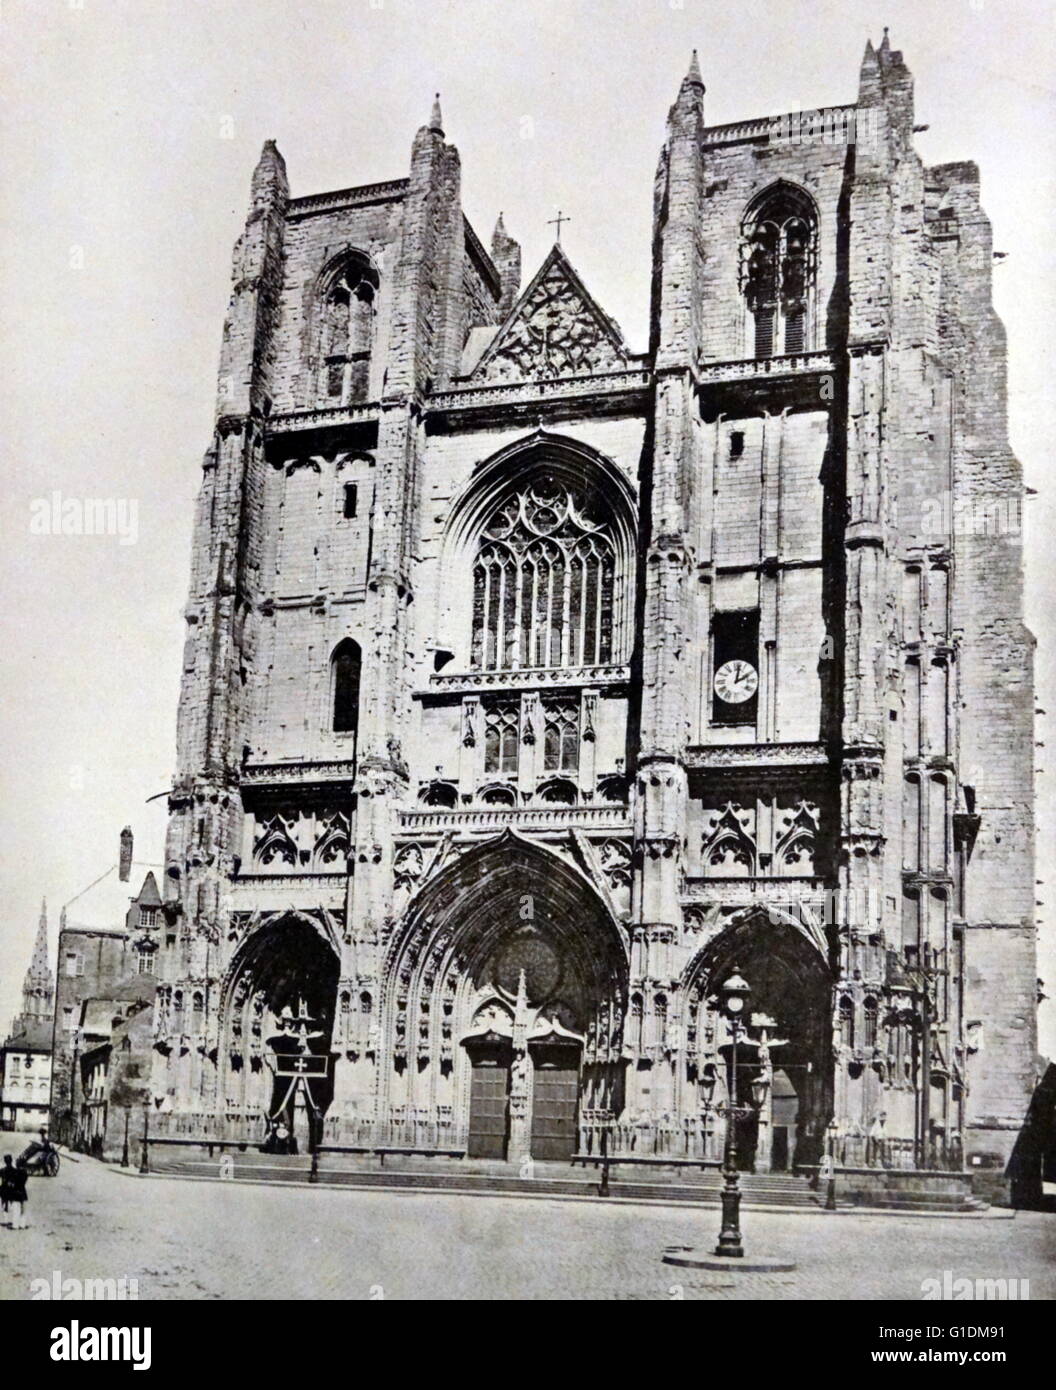 Photographic print of the exterior of Nantes Cathedral, a Gothic Roman Catholic cathedral in the city of Nantes, Pays de la Loire, France. Dated 19th Century Stock Photo